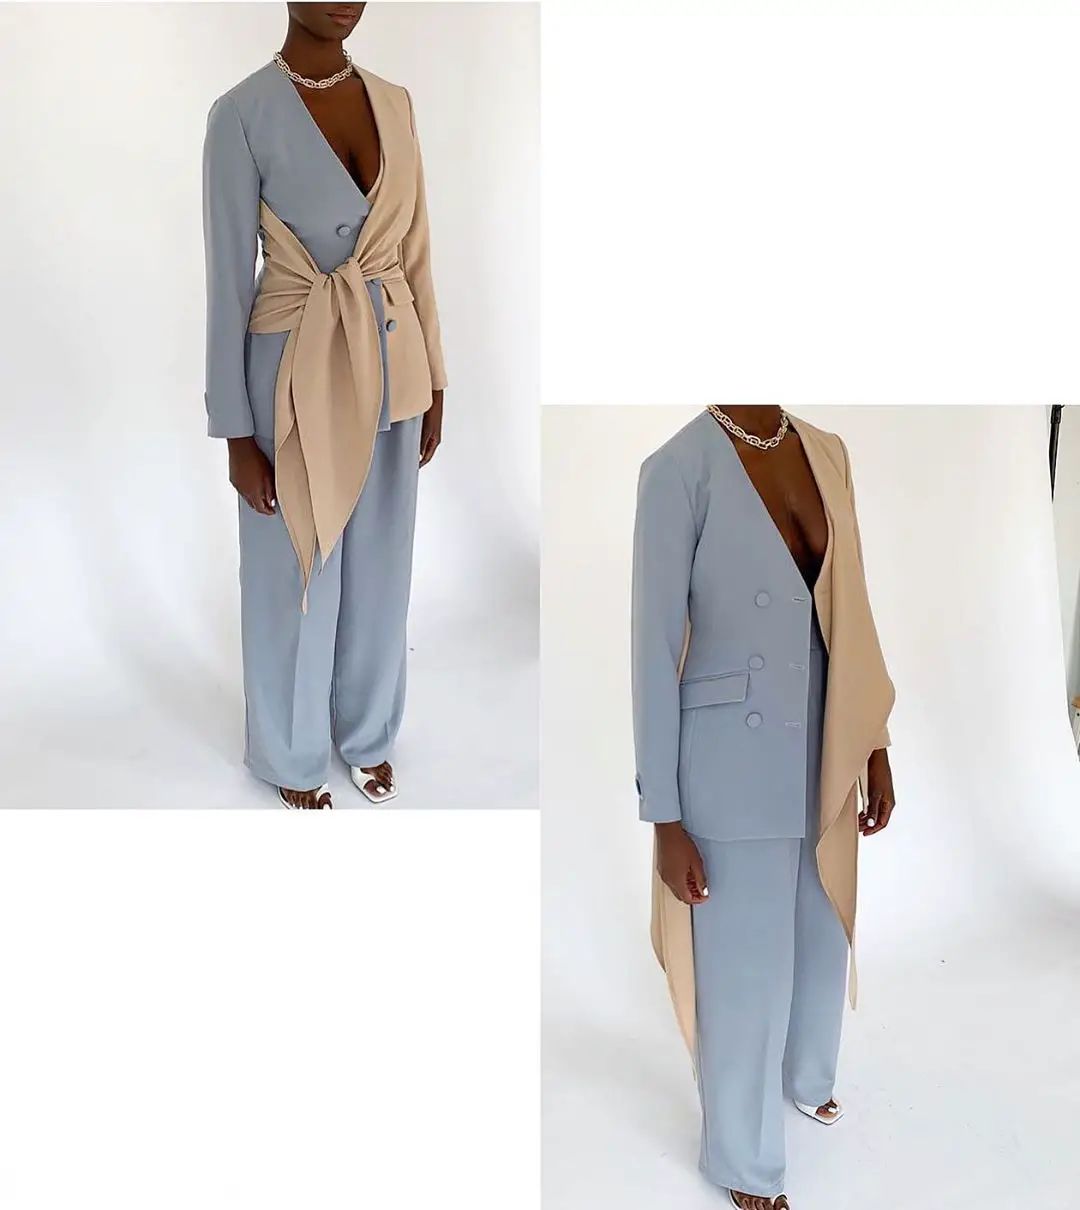 These Unconventional Suits By BBXMBAF Are The Real Deal